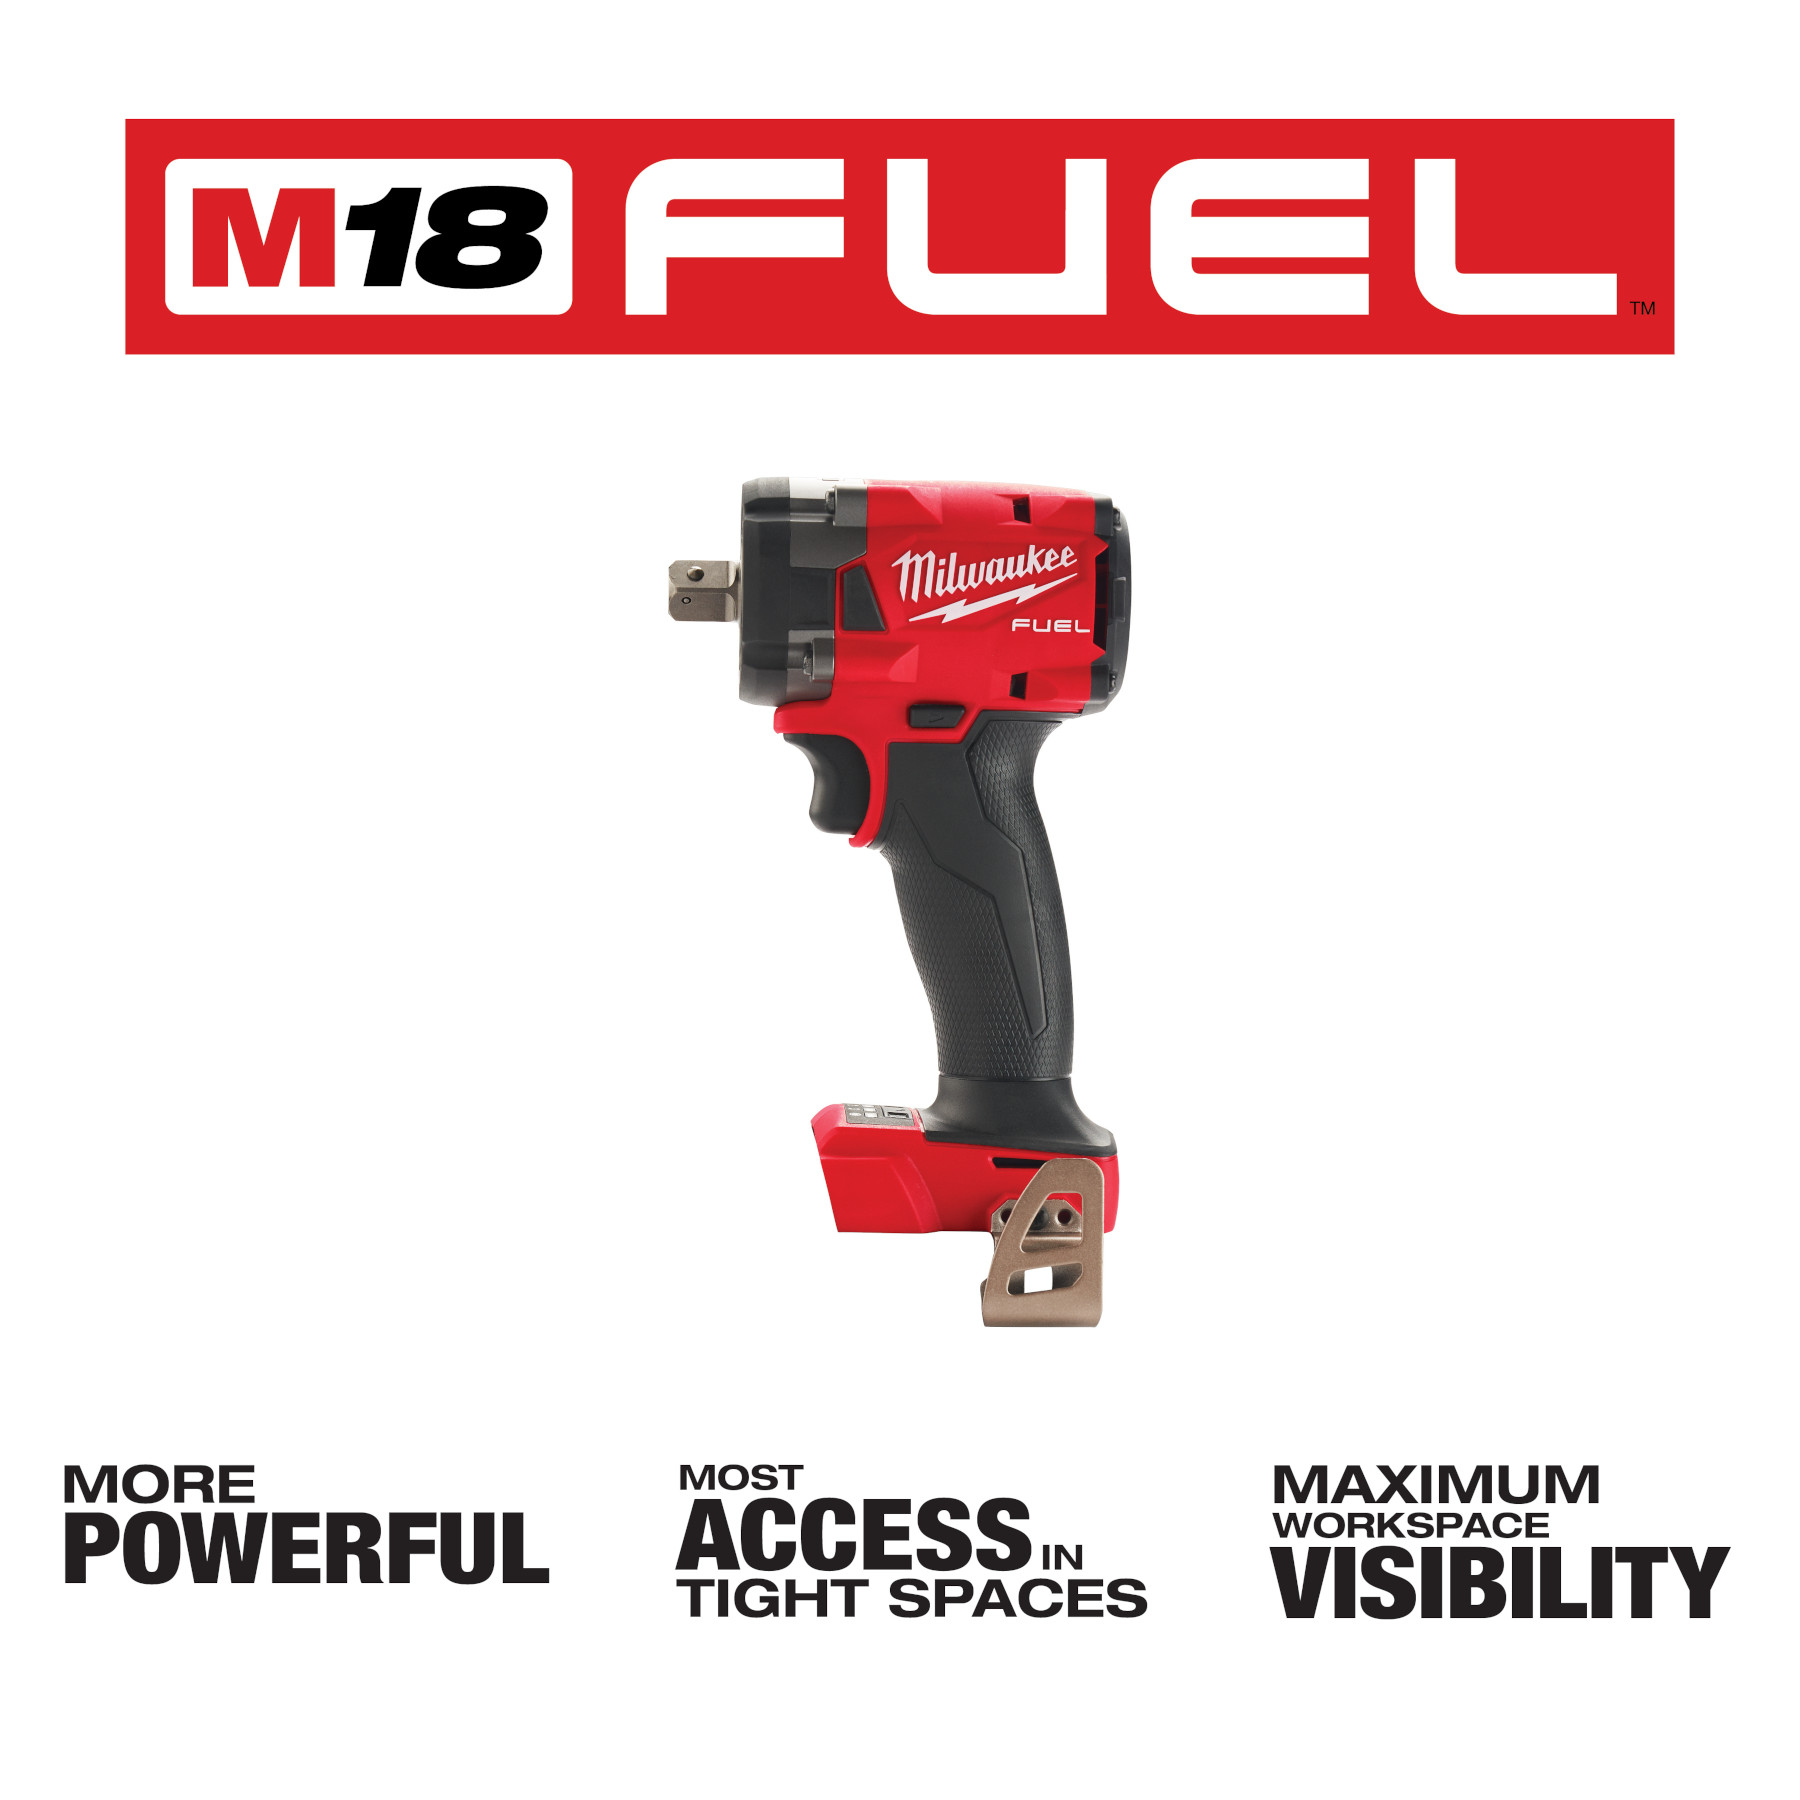 Milwaukee M18 FUEL 1/2 Inch Compact Impact Wrench with Pin Detent (Bare Tool) from Columbia Safety